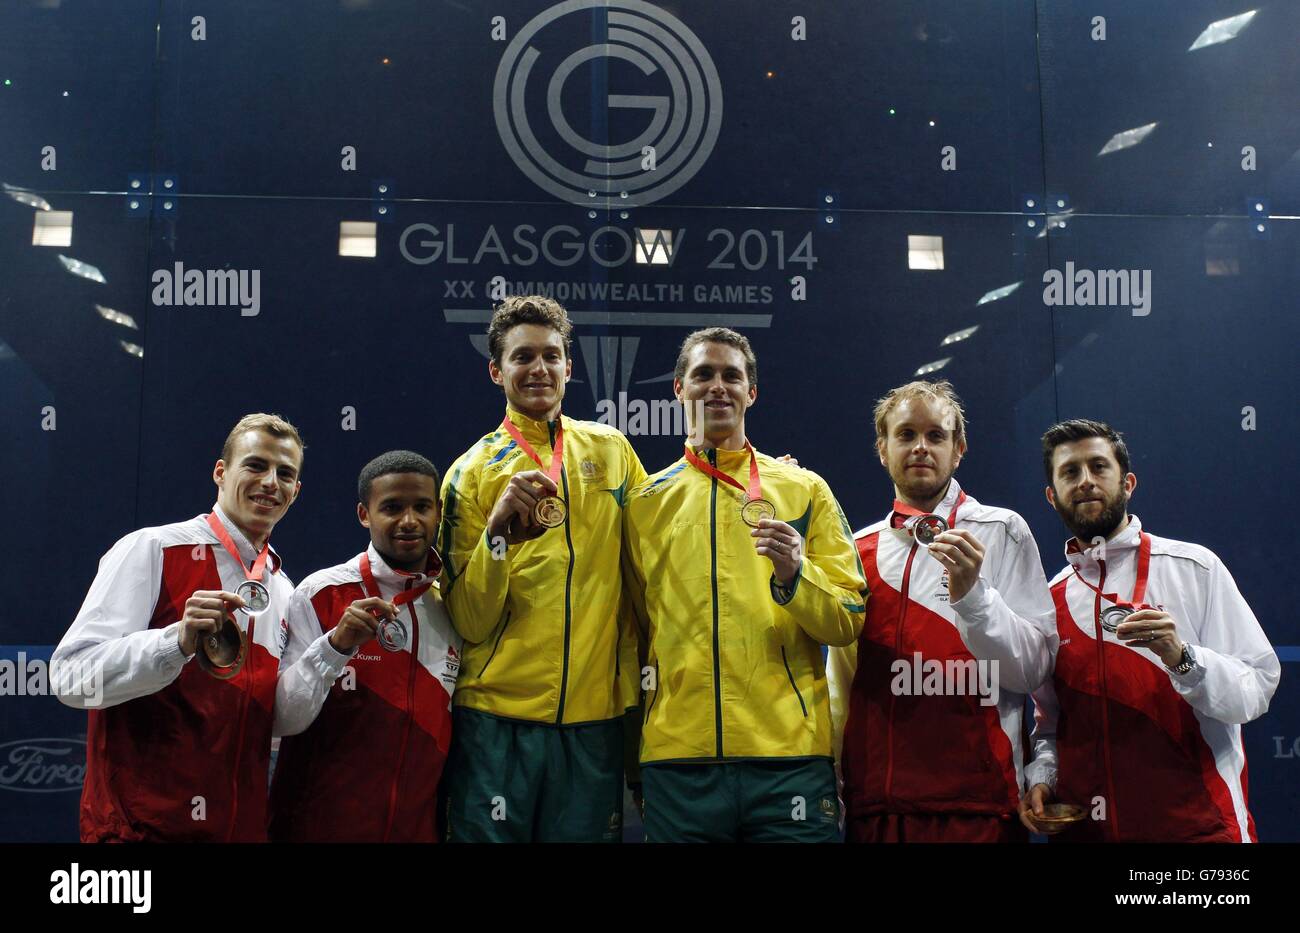 England's Silver medalists Adrian Grant and Nick Matthew (left), Australia's Gold medalists David Palmer and Cameron Pilley (centre) and England's Bronze medalists Daryl Selby and James Willstrop (right) at Scotstoun Sports Campus, during the 2014 Commonwealth Games in Glasgow. Stock Photo